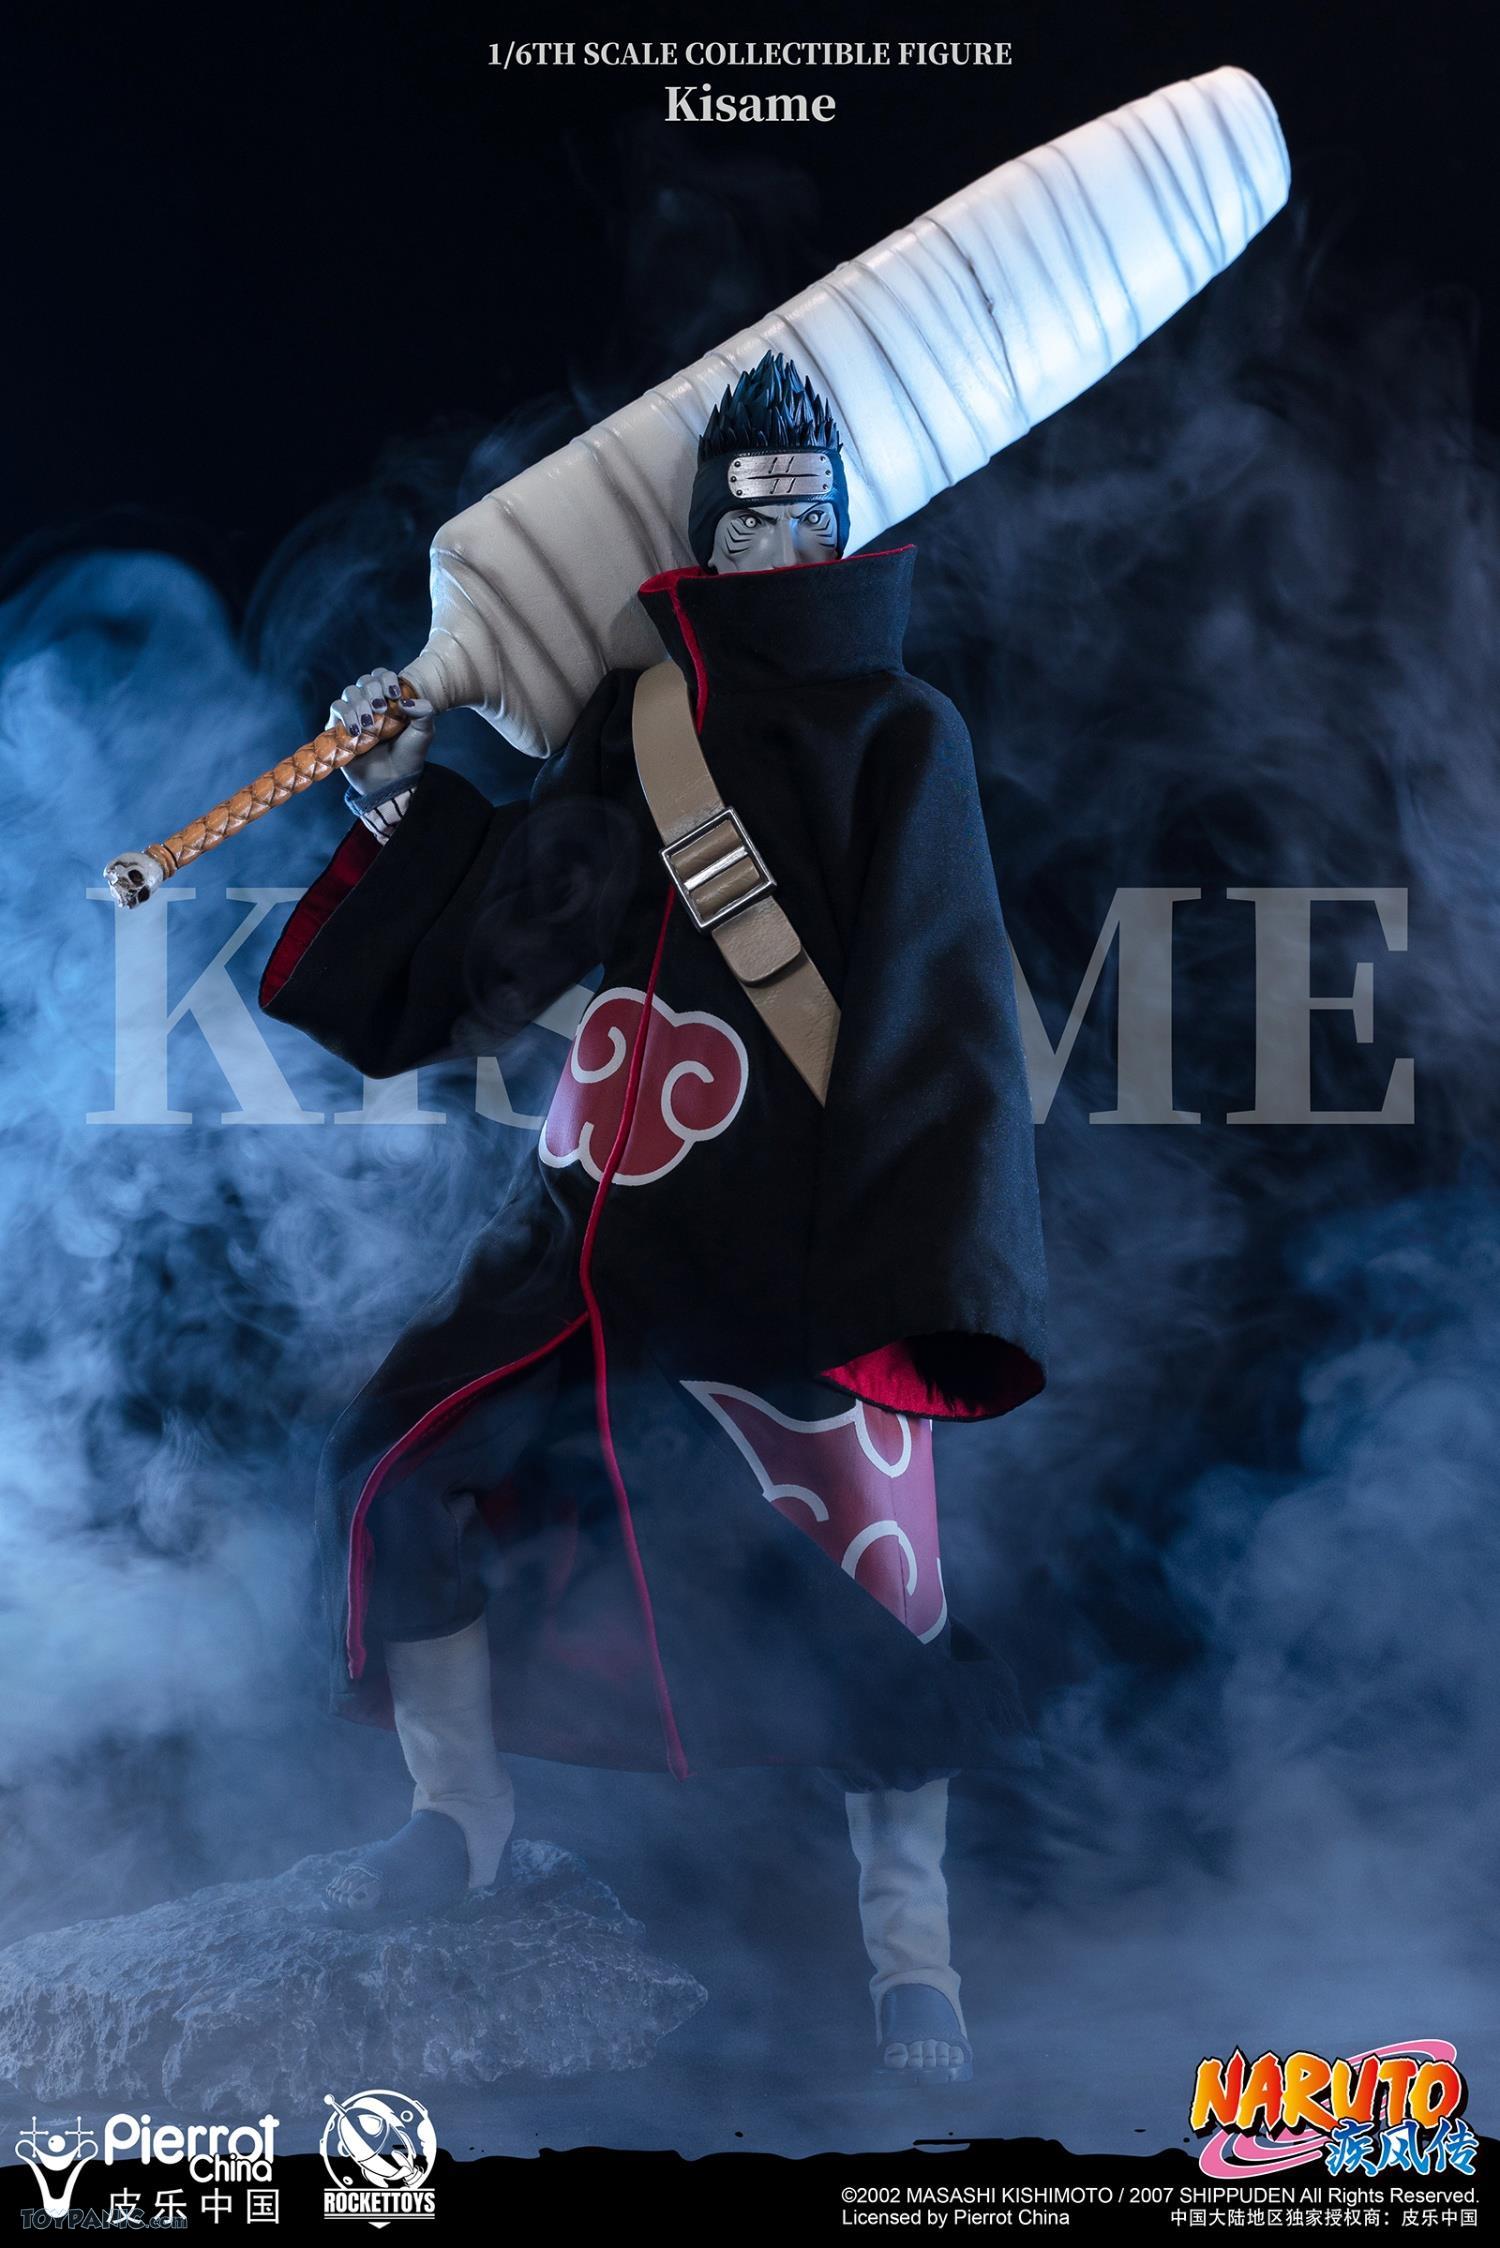 male - NEW PRODUCT: Rocket Toys ROC-007 1/6 Scale Kisame 221202460433PM_5828364